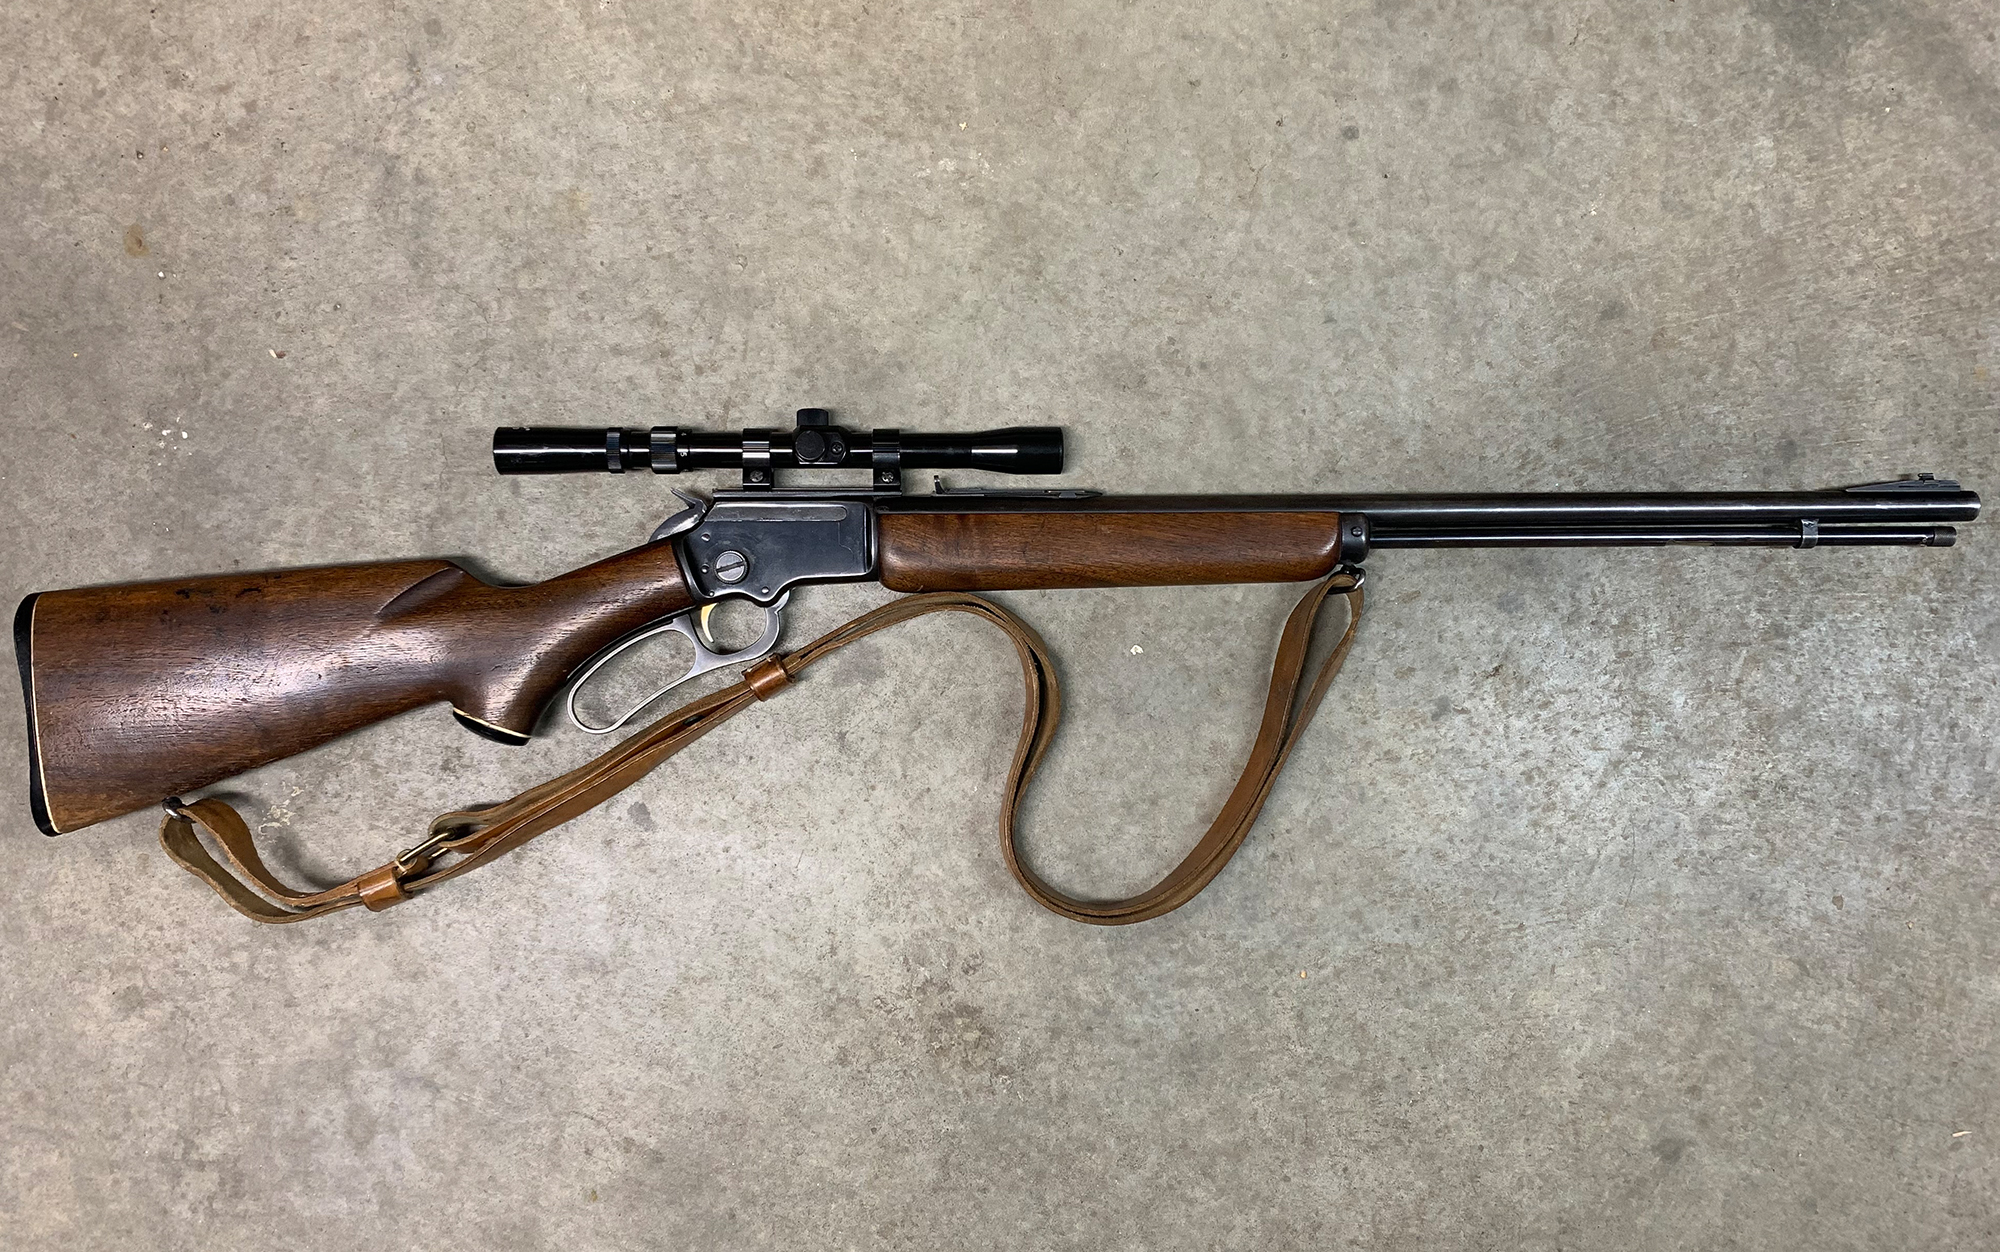 The Marlin Golden 39A is the best classic heirloom gun for rabbit hunting.